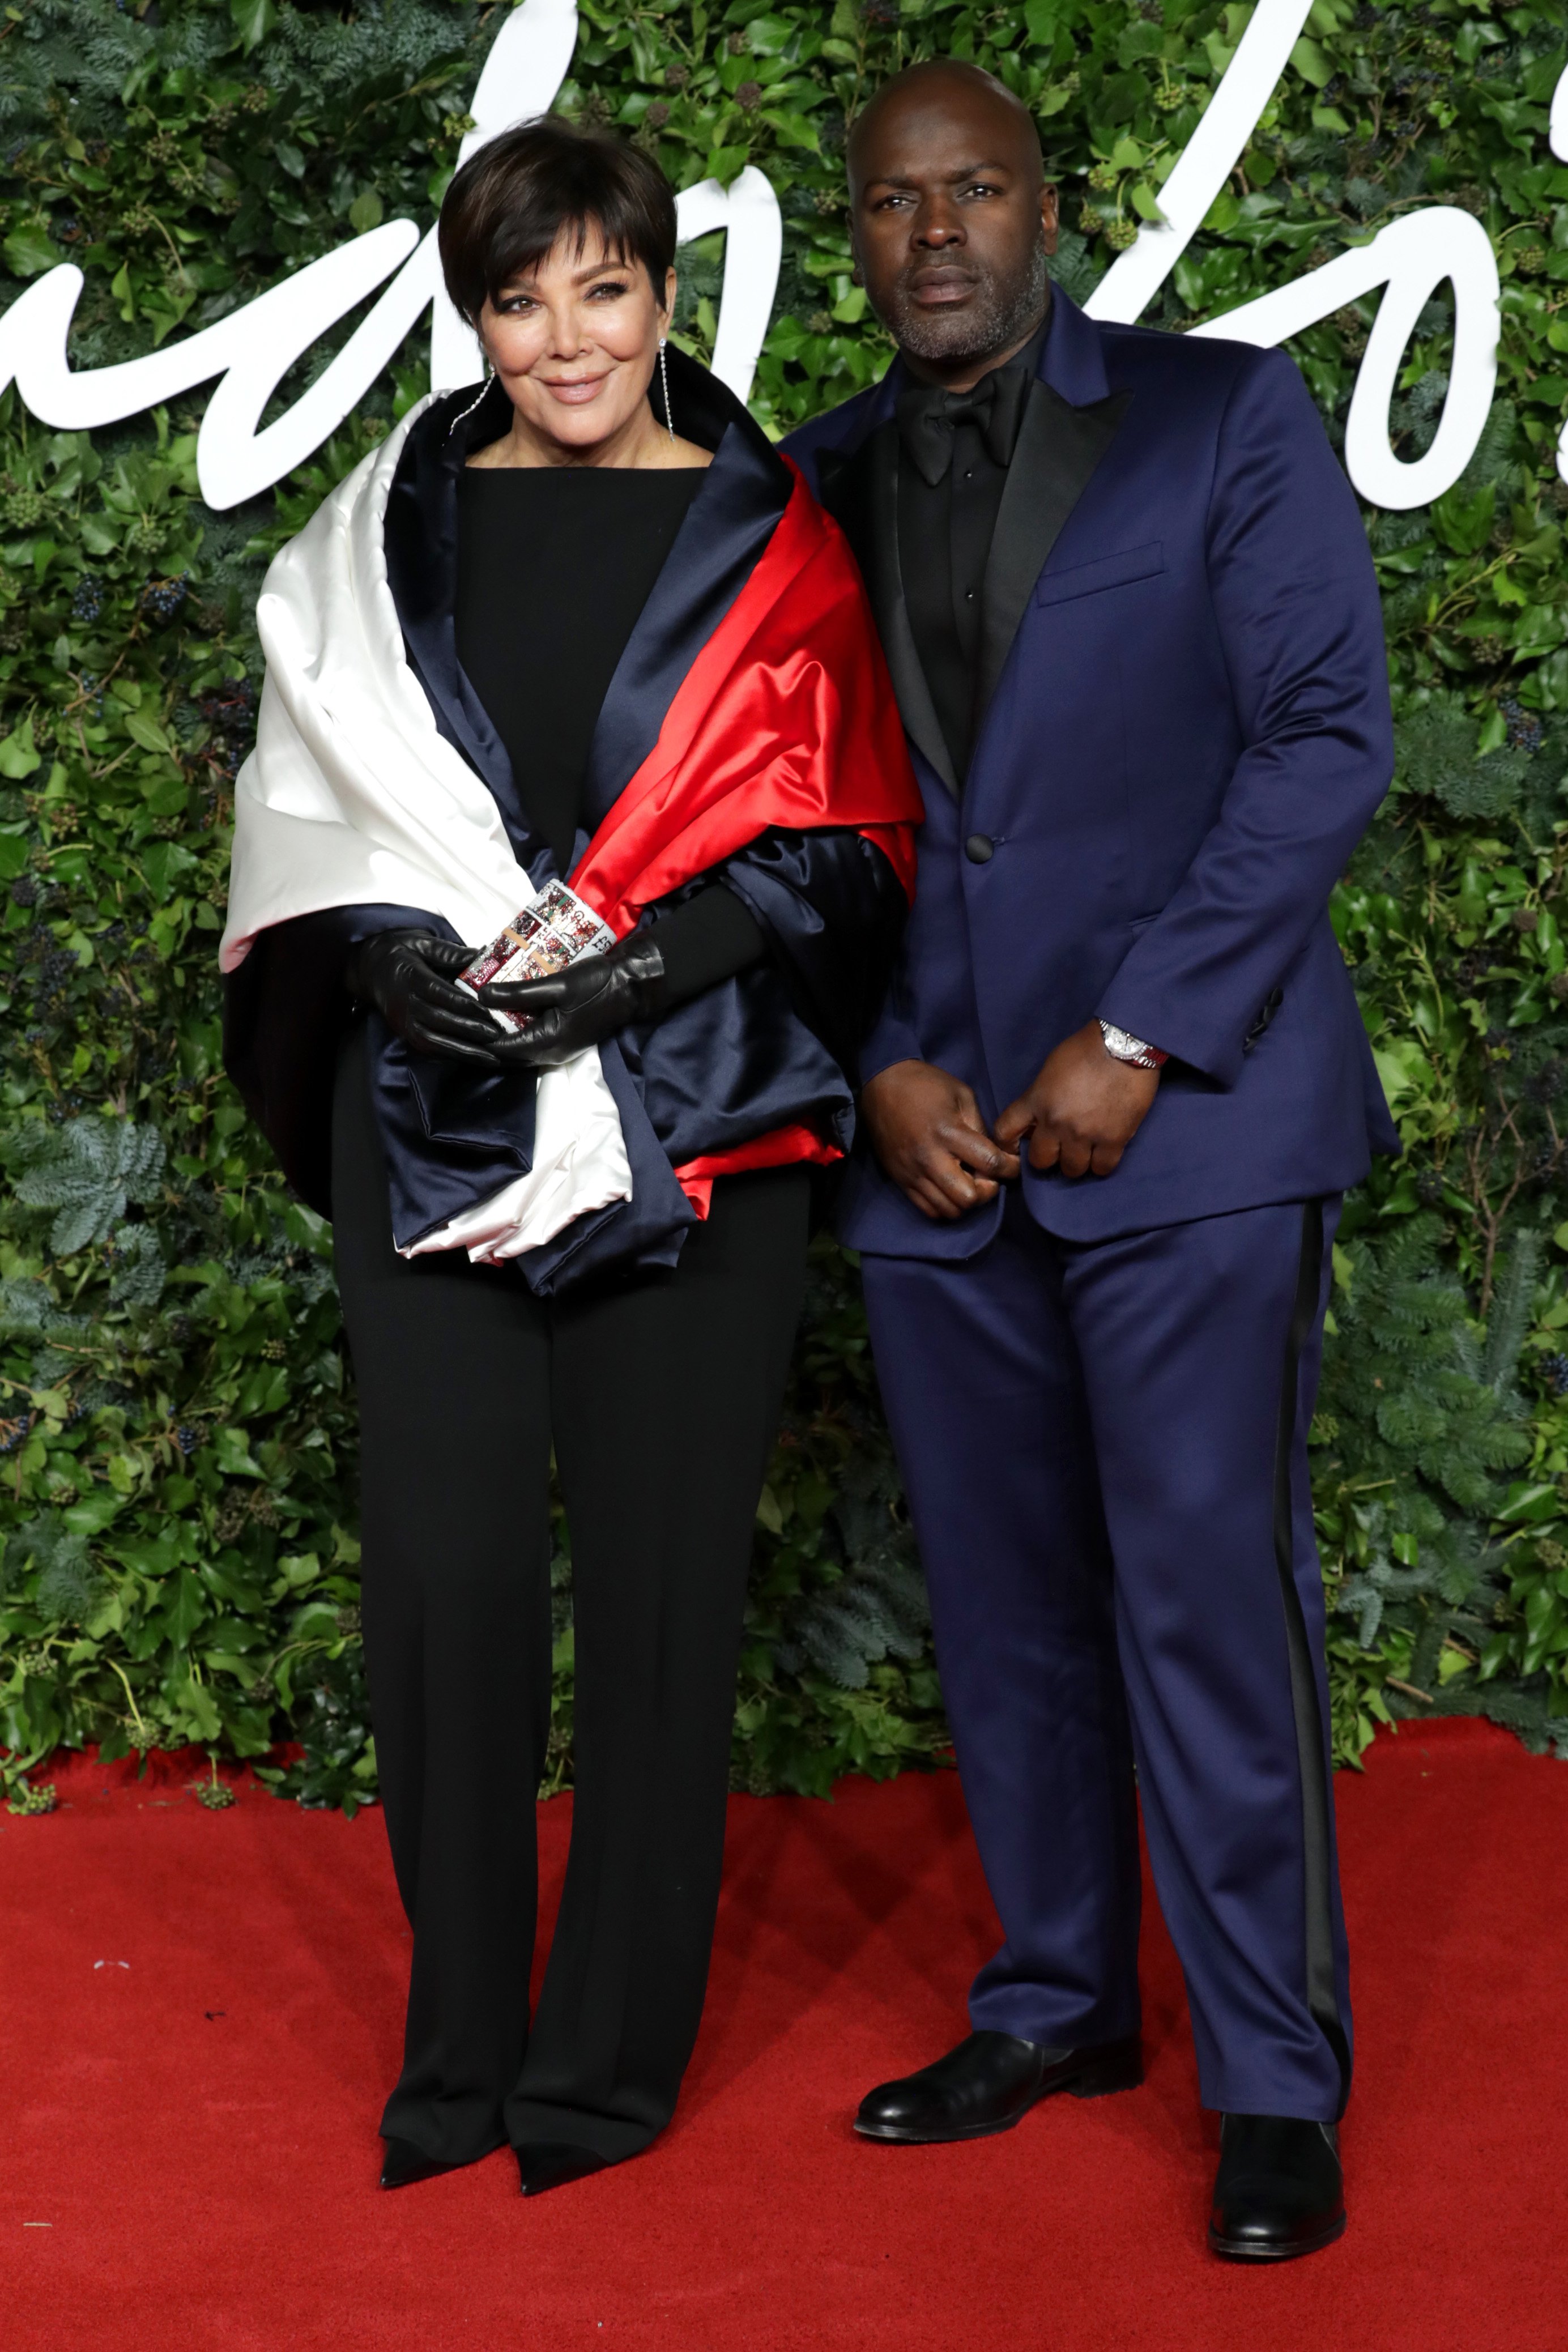 Kris Jenner Hints at Good Sex Life With Boyfriend Corey Gamble picture